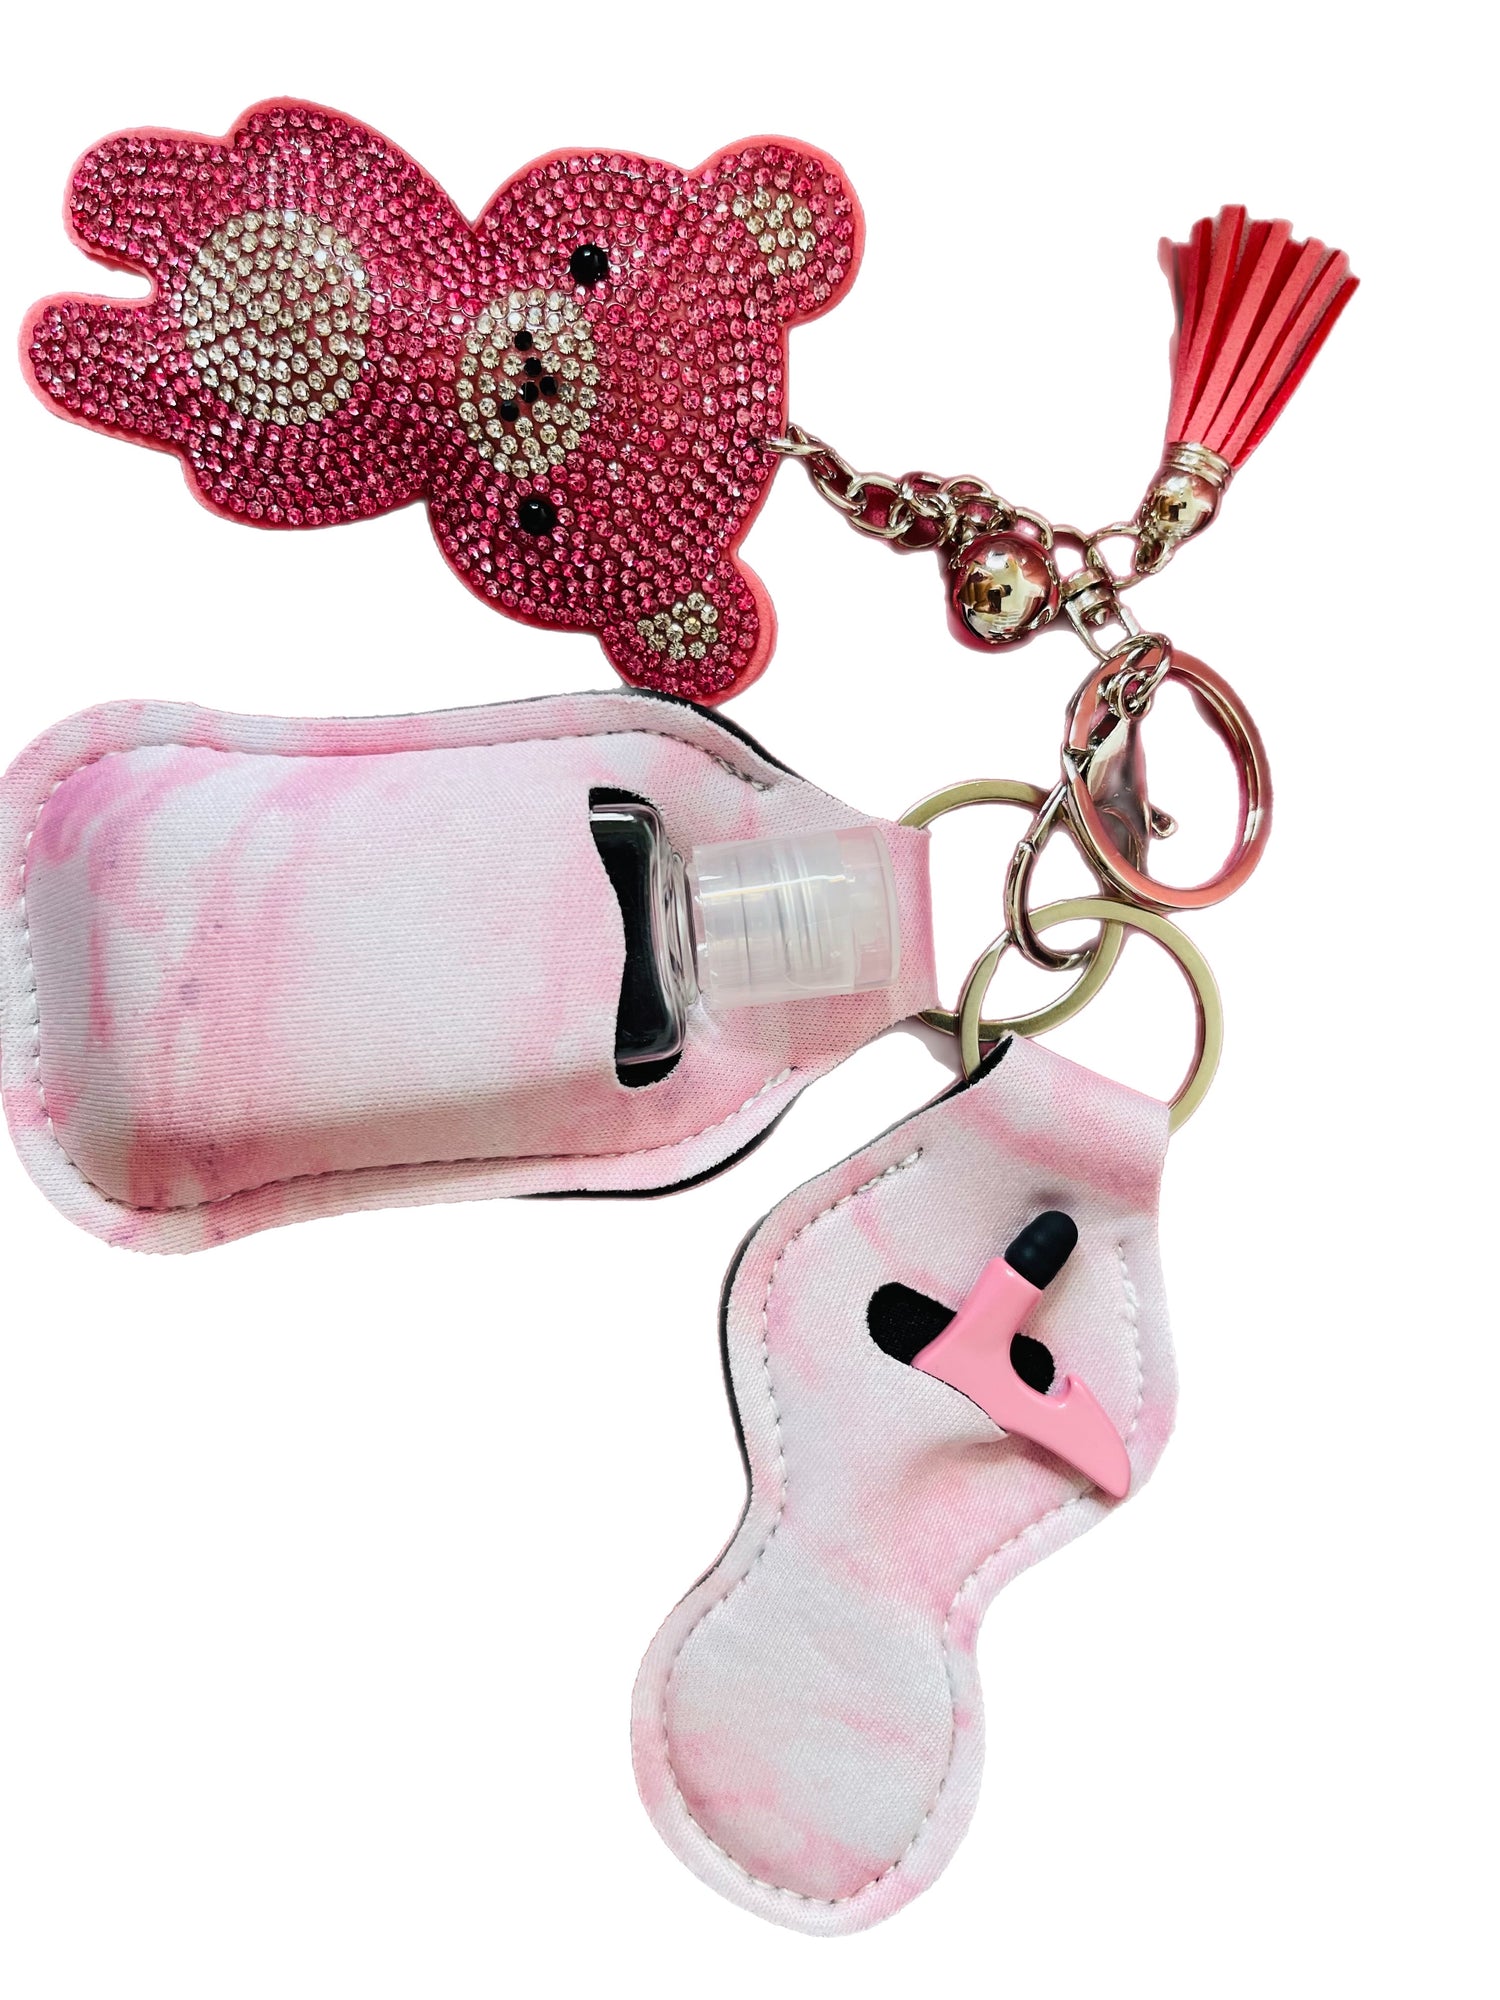 Bling keychain accessories